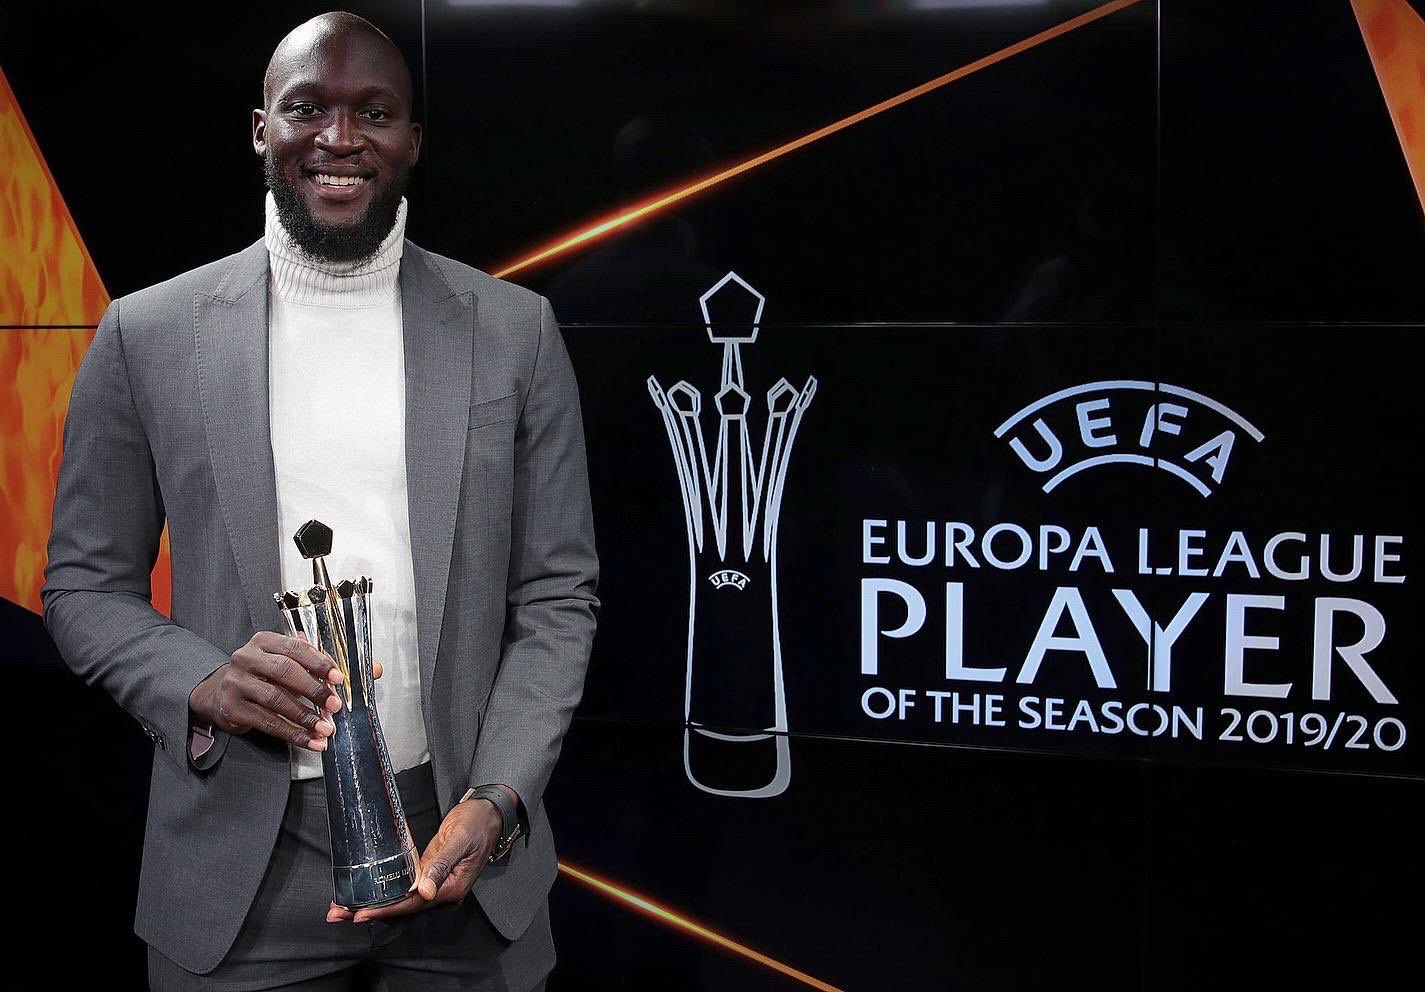 Thank you for believing in me, says Lukaku after receiving EUROPA award